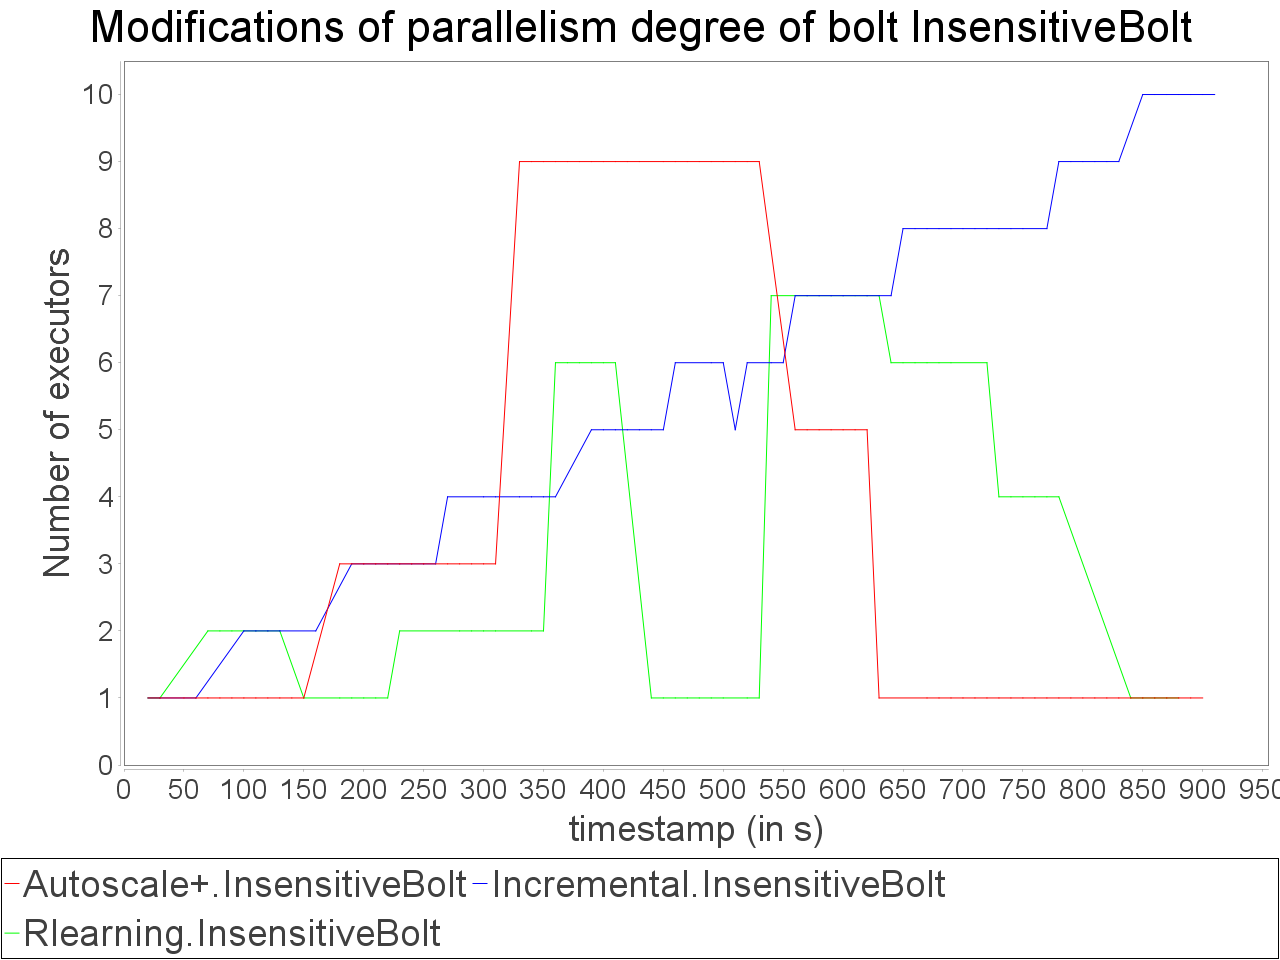 Parallelism degree modifications of insentive but heavy operator